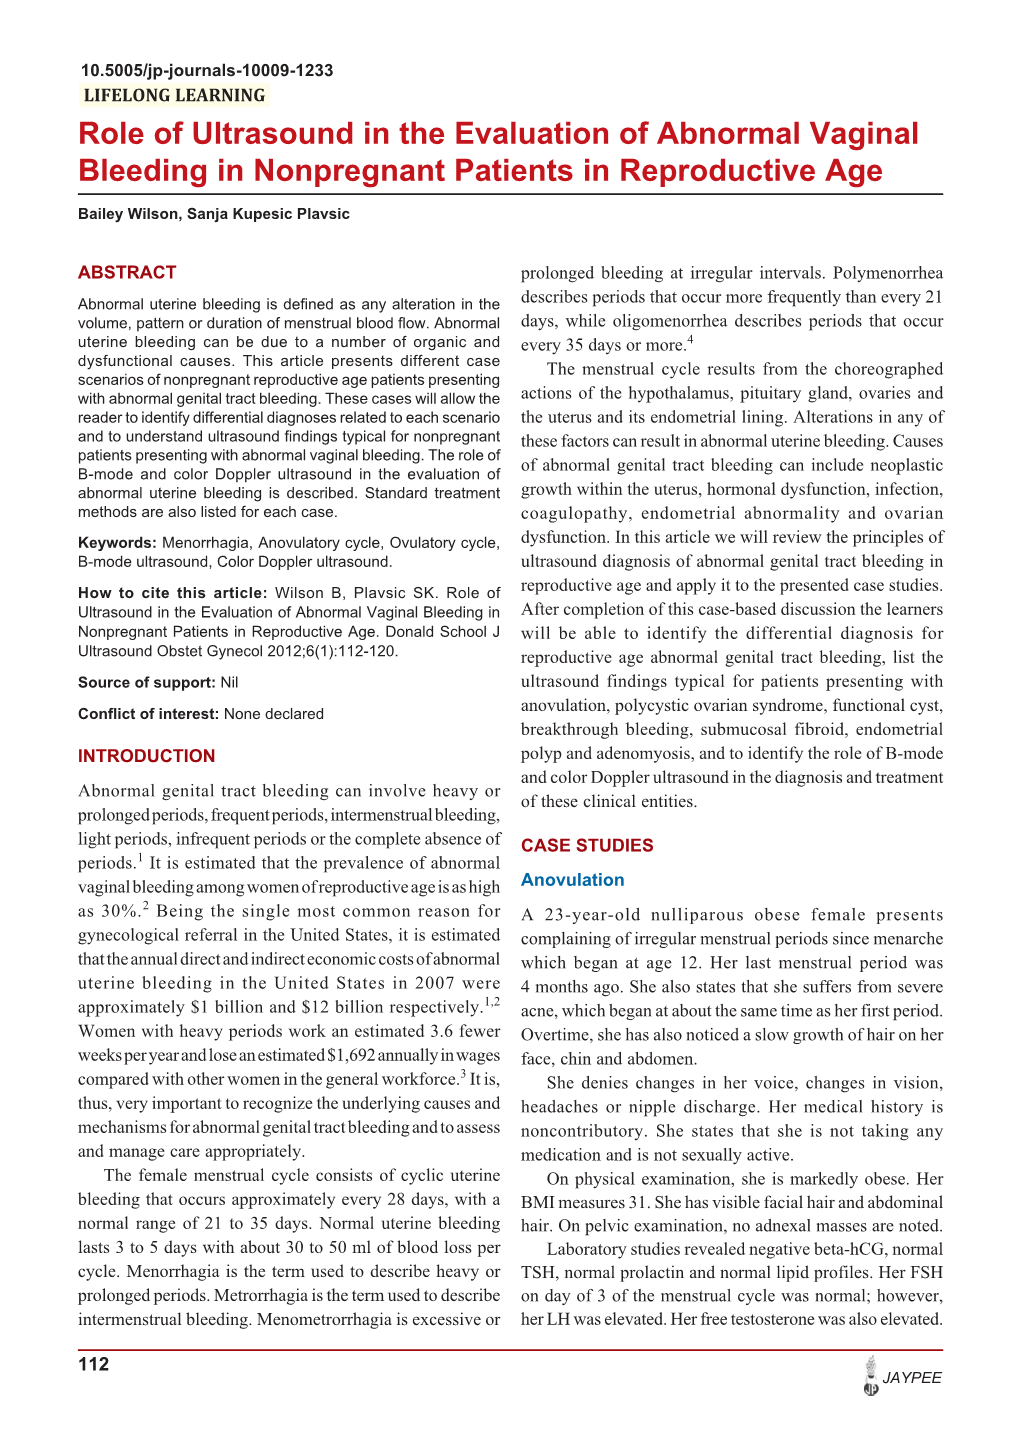 Role of Ultrasound in the Evaluation of Abnormal Vaginal Bleeding in Nonpregnant Patients in Reproductive Age